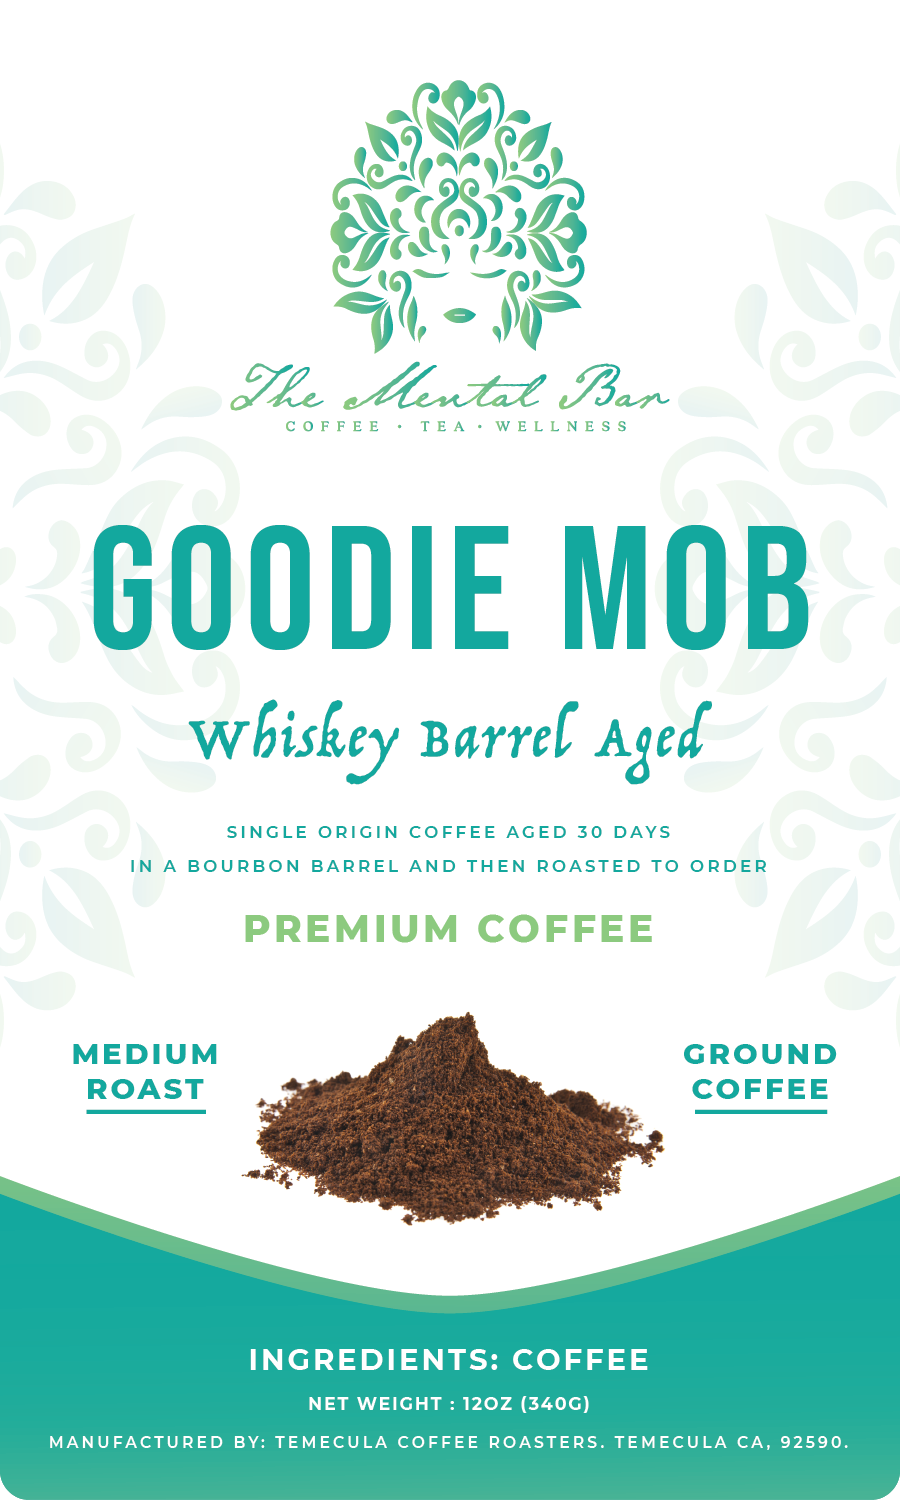 Goodie mob (Whiskey Barrel Aged) - The Mental Bar